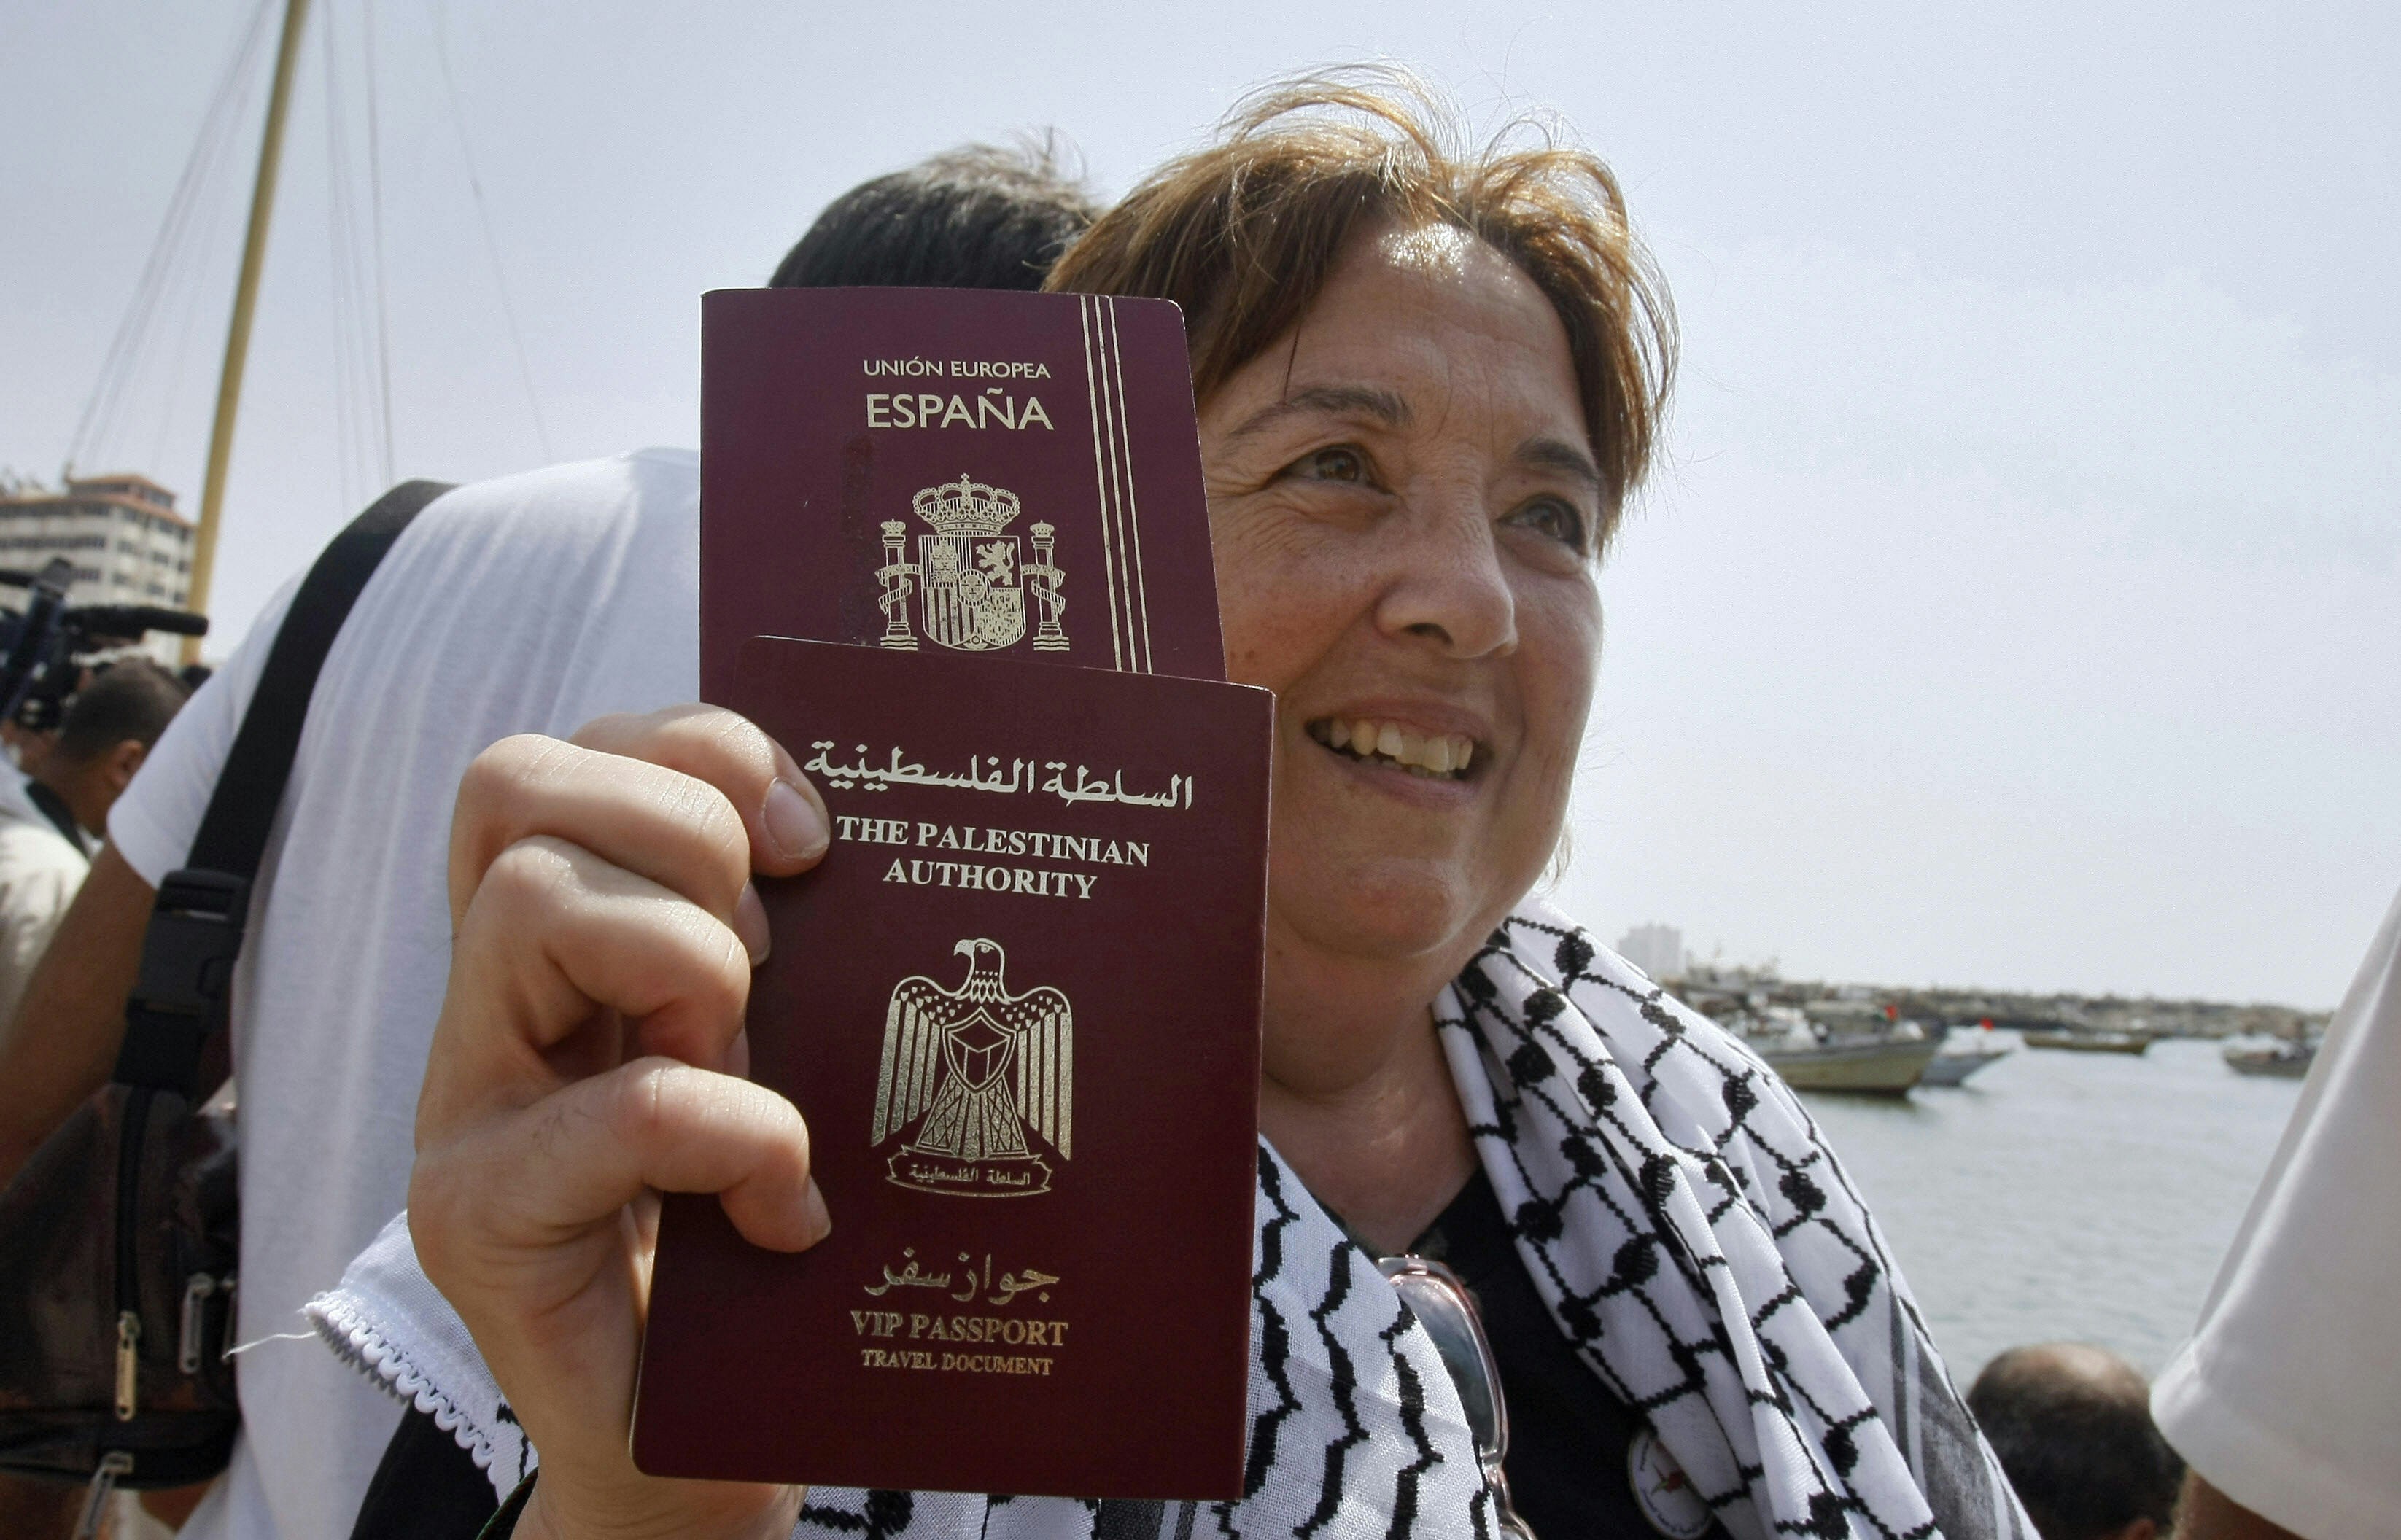 A woman with short light brown hair hold up two maroon passports with gold lettering, one for Espana and one from the Palestinian Authority. She is wearing a white and black scarf and is standing by the sea in Gaza